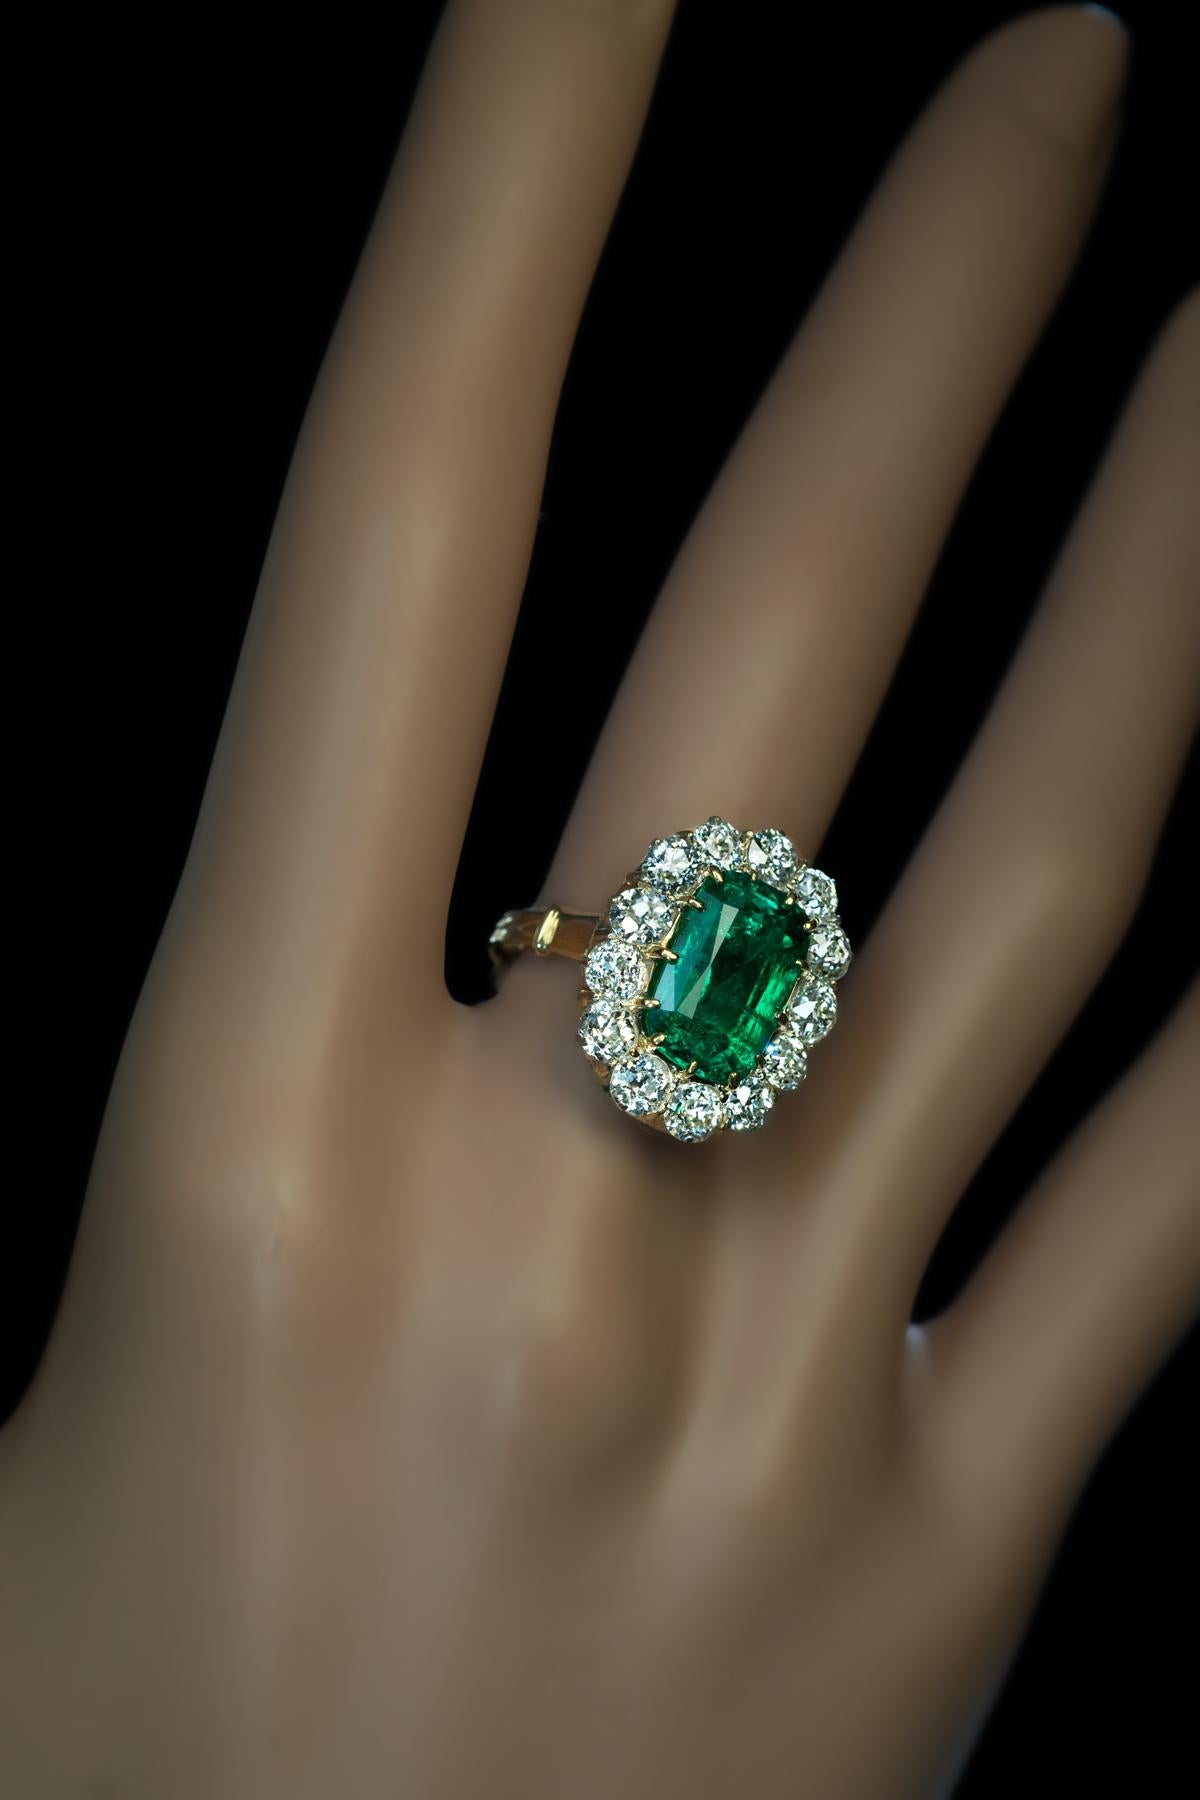 This antique Russian ring dated ‘1871’, features a very rare Russian (the Ural Mountains) lush bluish green emerald (3.24 Ct) surrounded by bright white old mine cut diamonds.

The ring is crafted in 14K yellow gold. The diamonds are set in silver